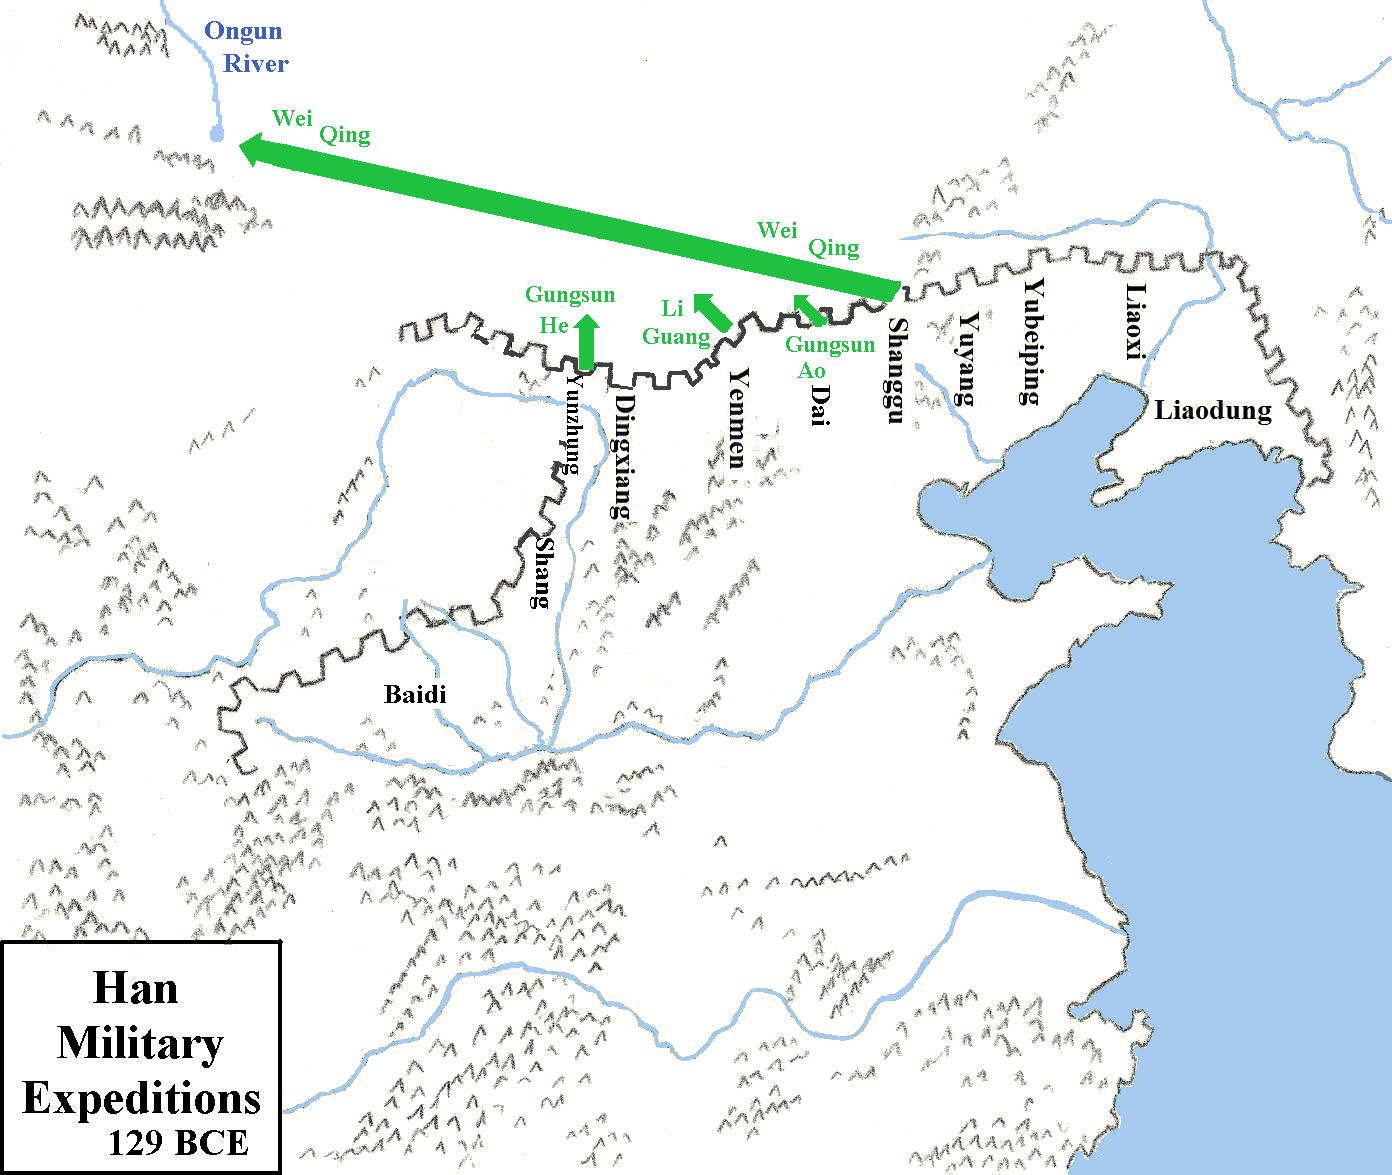 Map showing Chinese military expeditions in 129 BCE